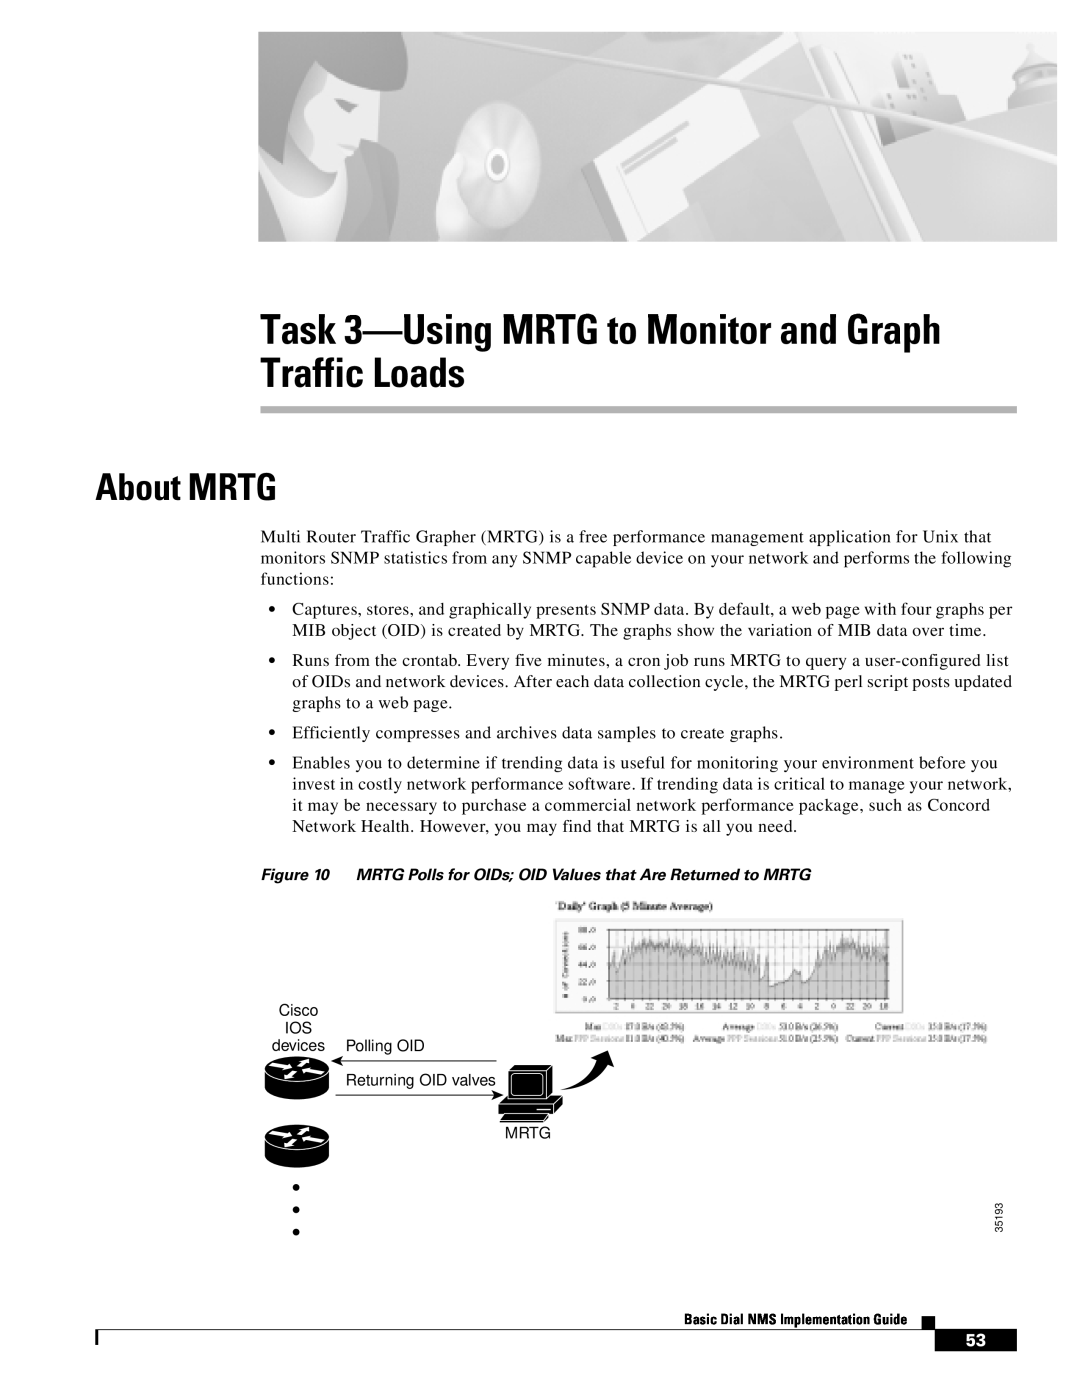 Cisco Systems Dial NMS manual Task 3-Using MRTG to Monitor and Graph Traffic Loads, About MRTG 